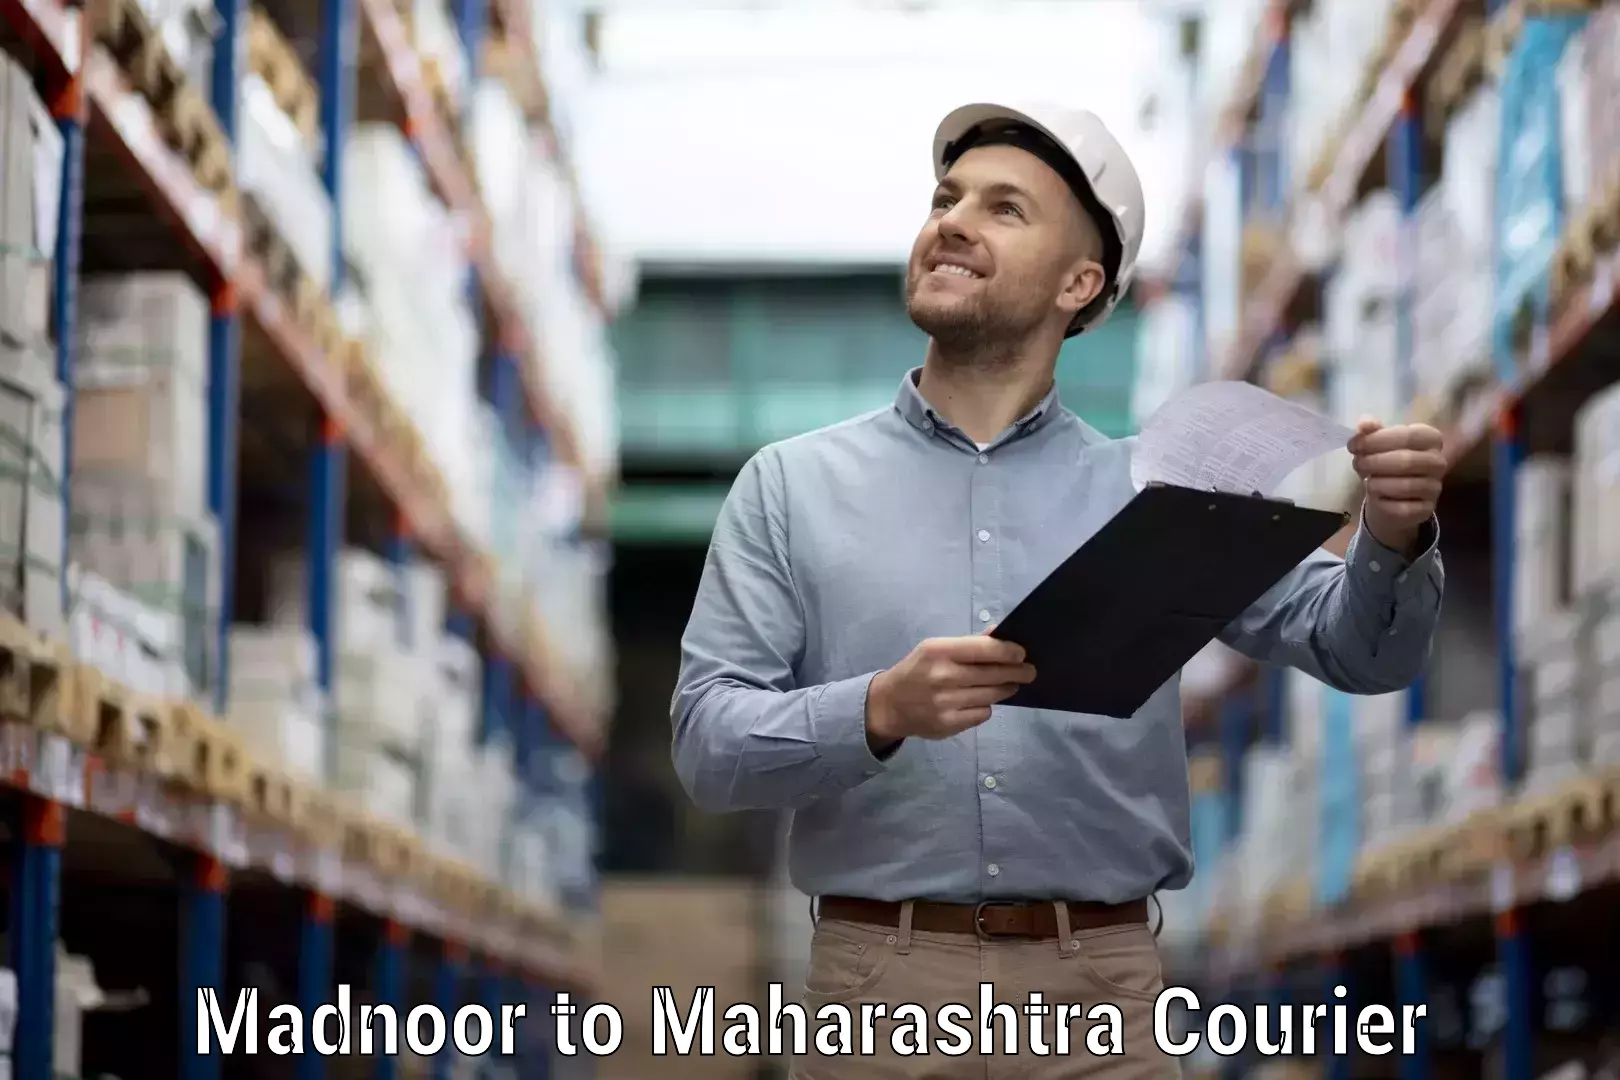 Courier service comparison Madnoor to Pandharkawada